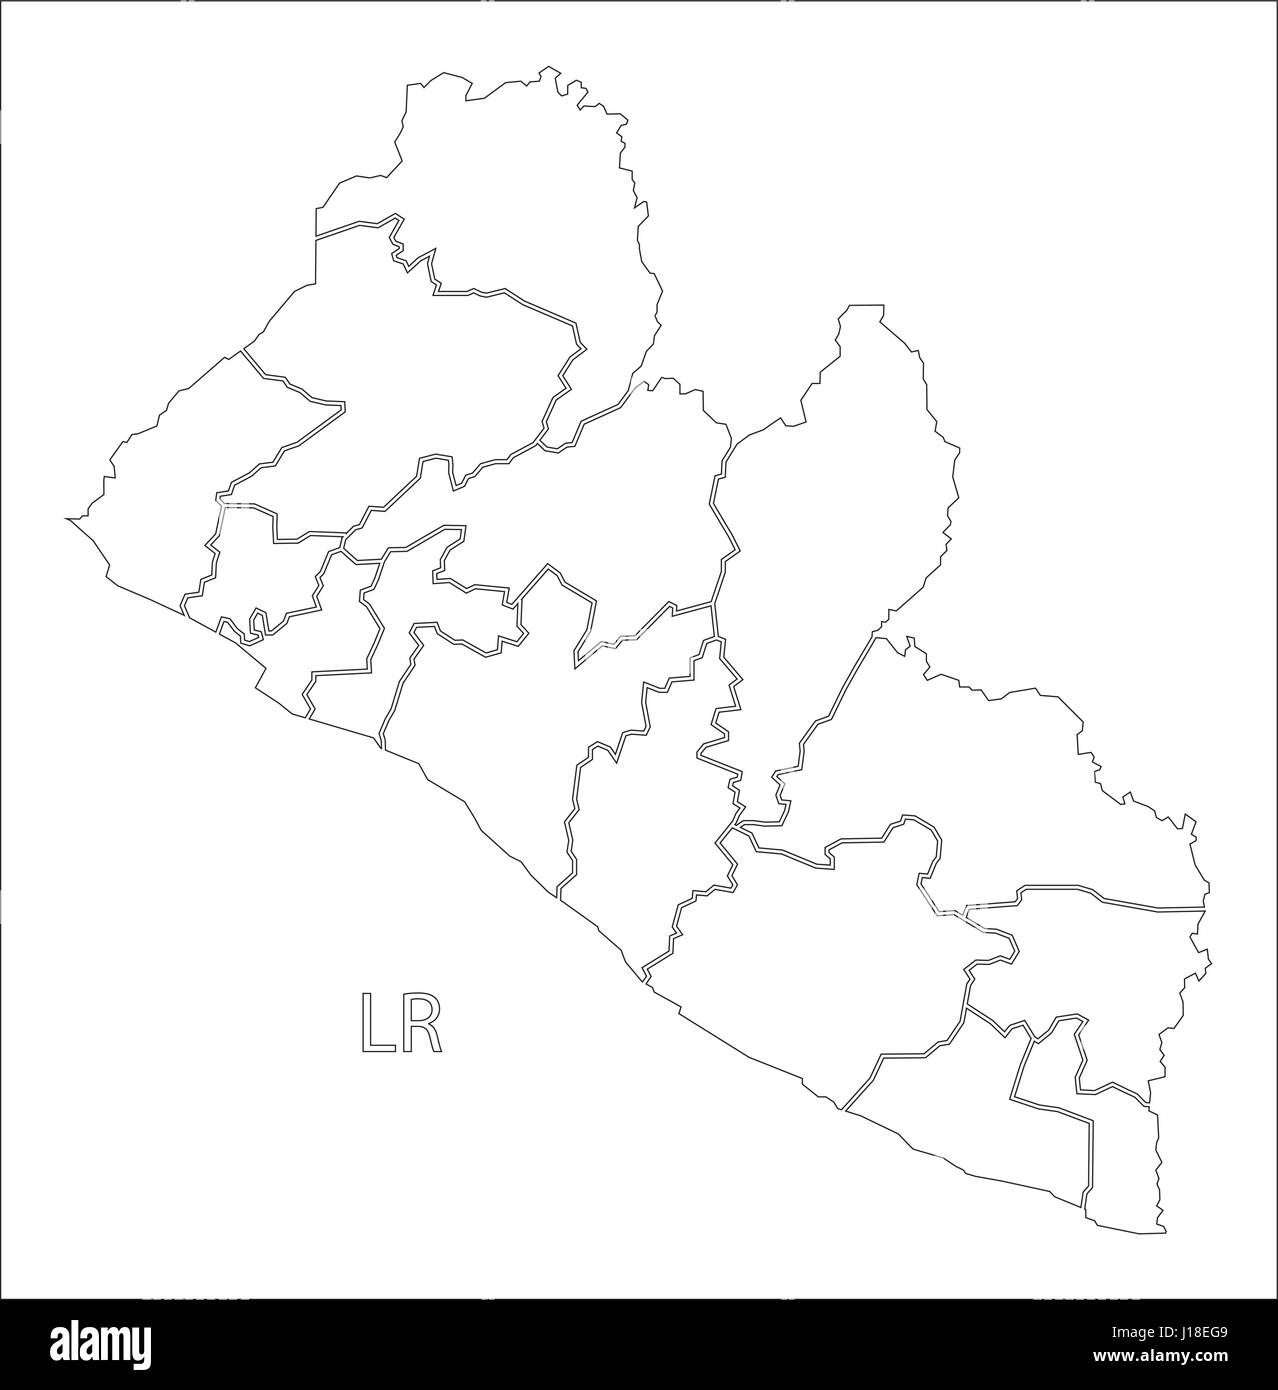 Liberia outline silhouette map illustration with counties Stock Vector